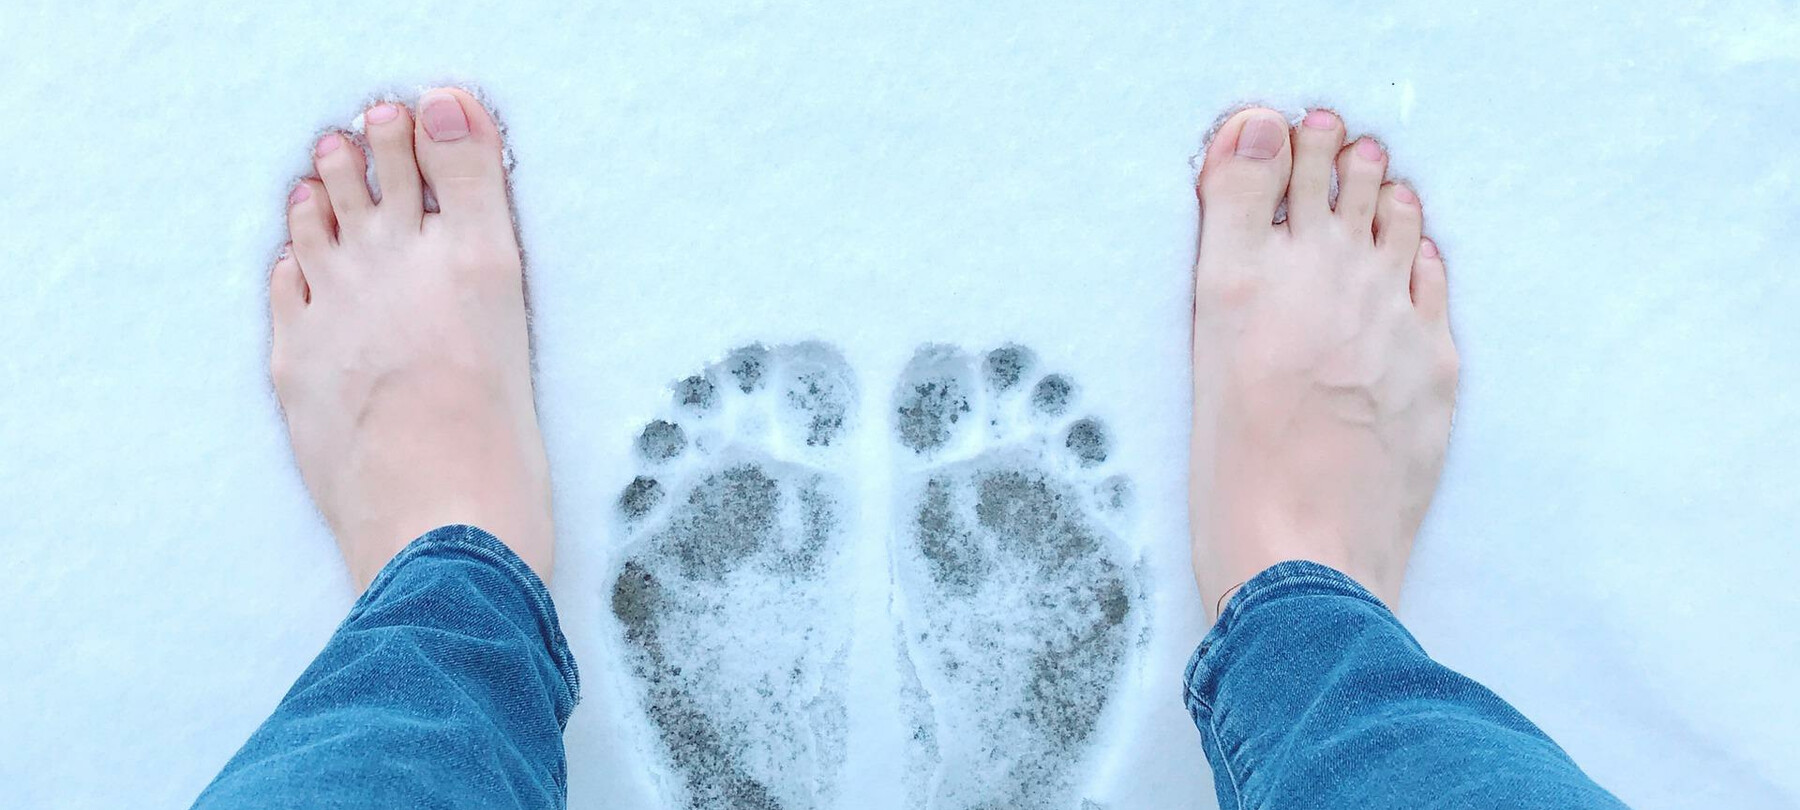 Barefoot in the snow